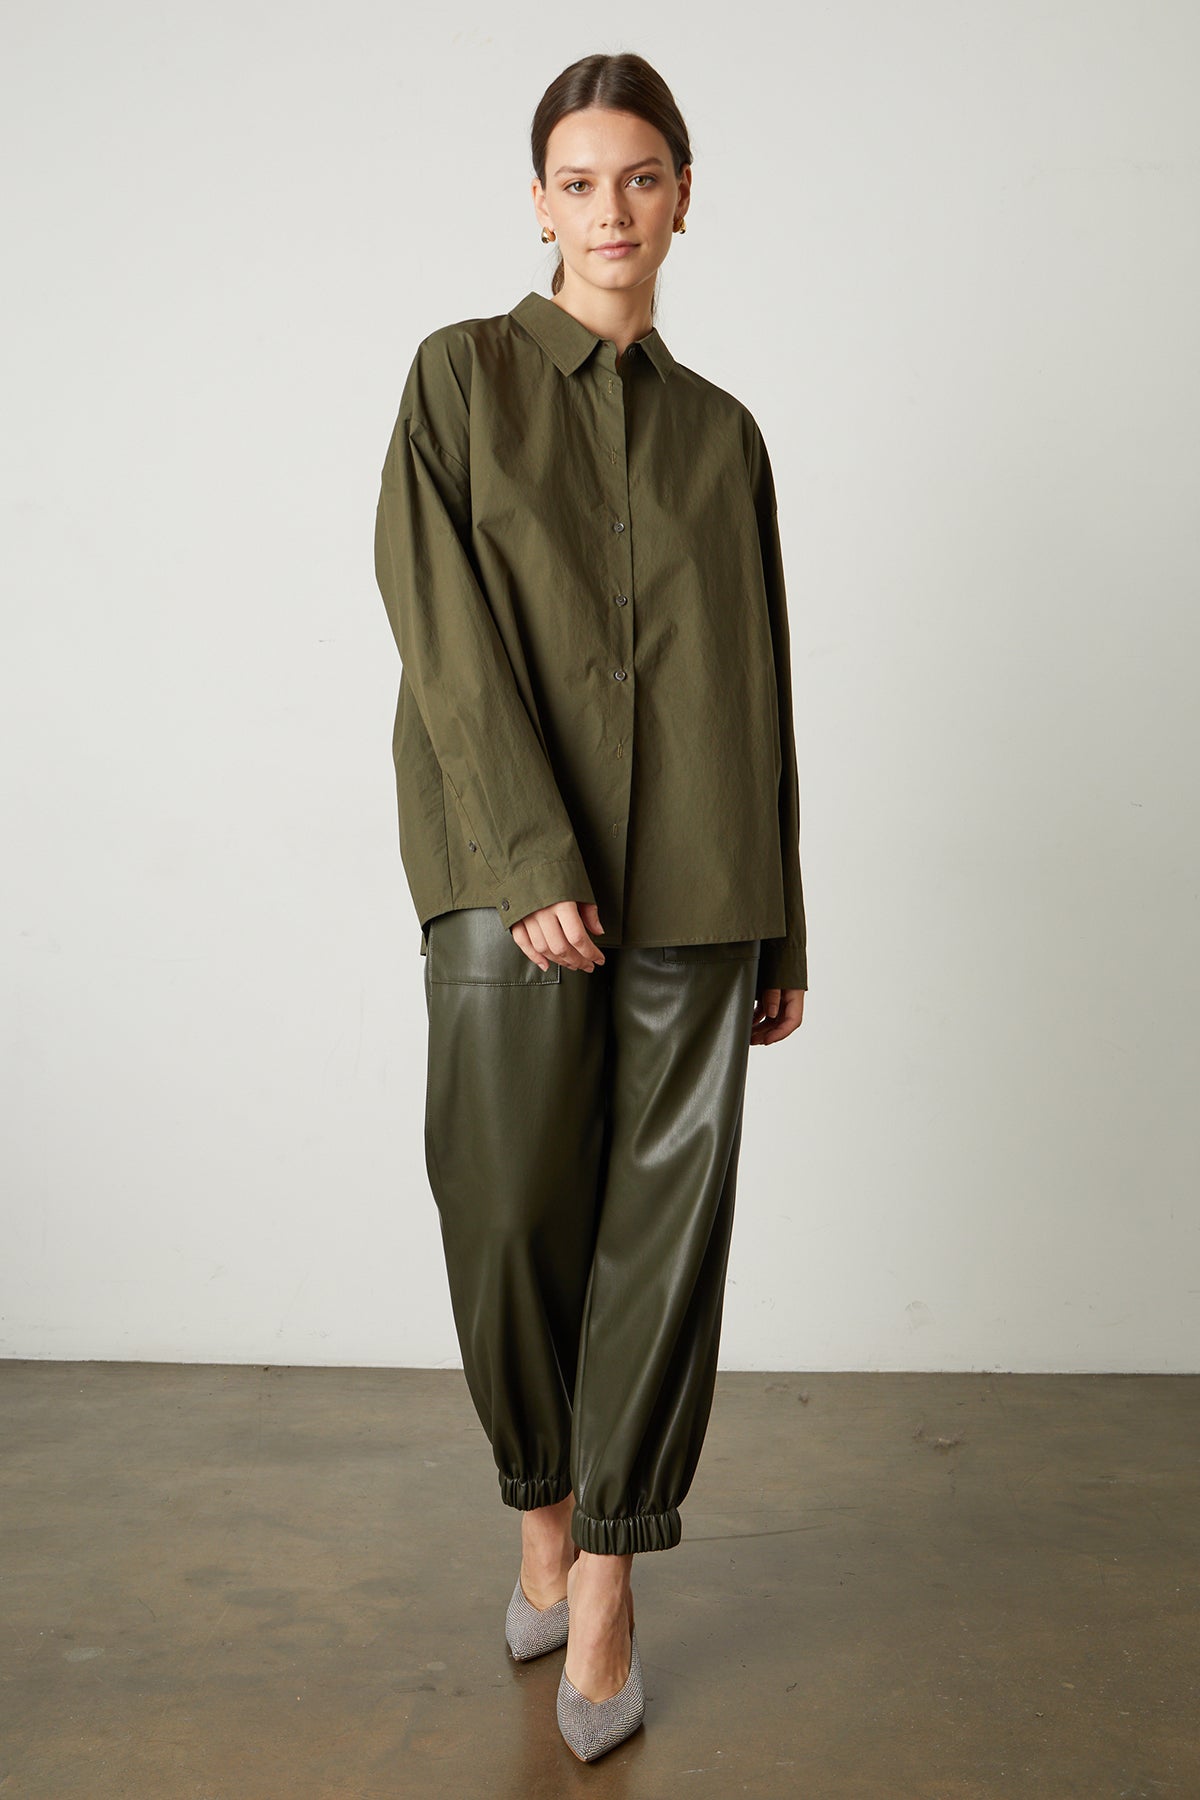   Dakota Button-Up Shirt in olivine with Rihanna Vegan Leather Pants in olive full length front 